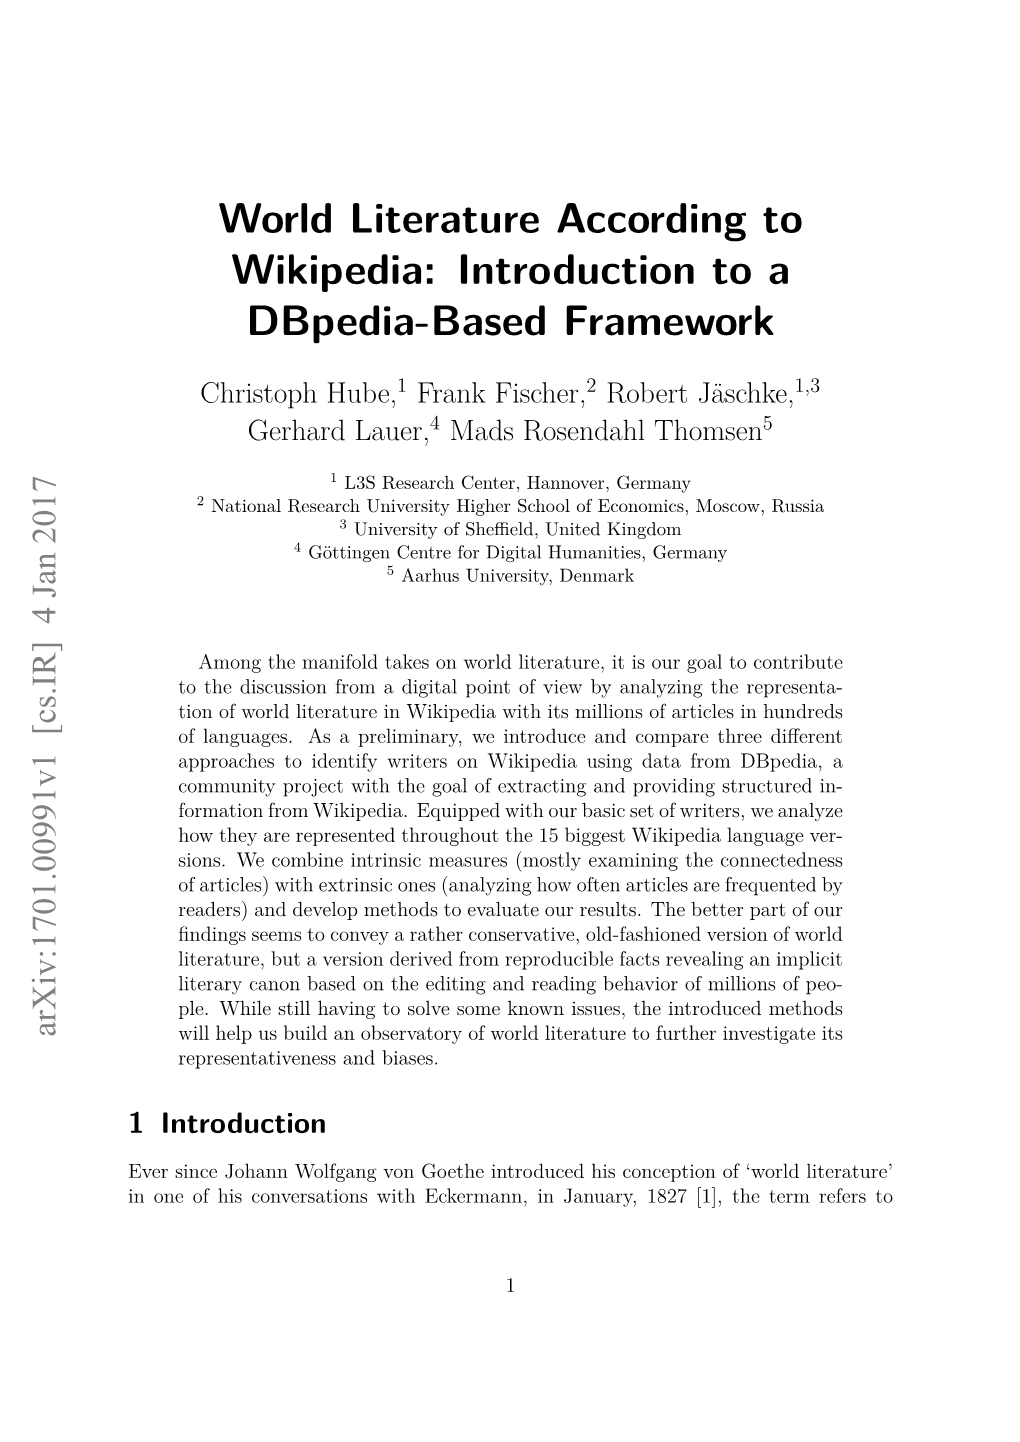 World Literature According to Wikipedia: Introduction to a Dbpedia-Based Framework